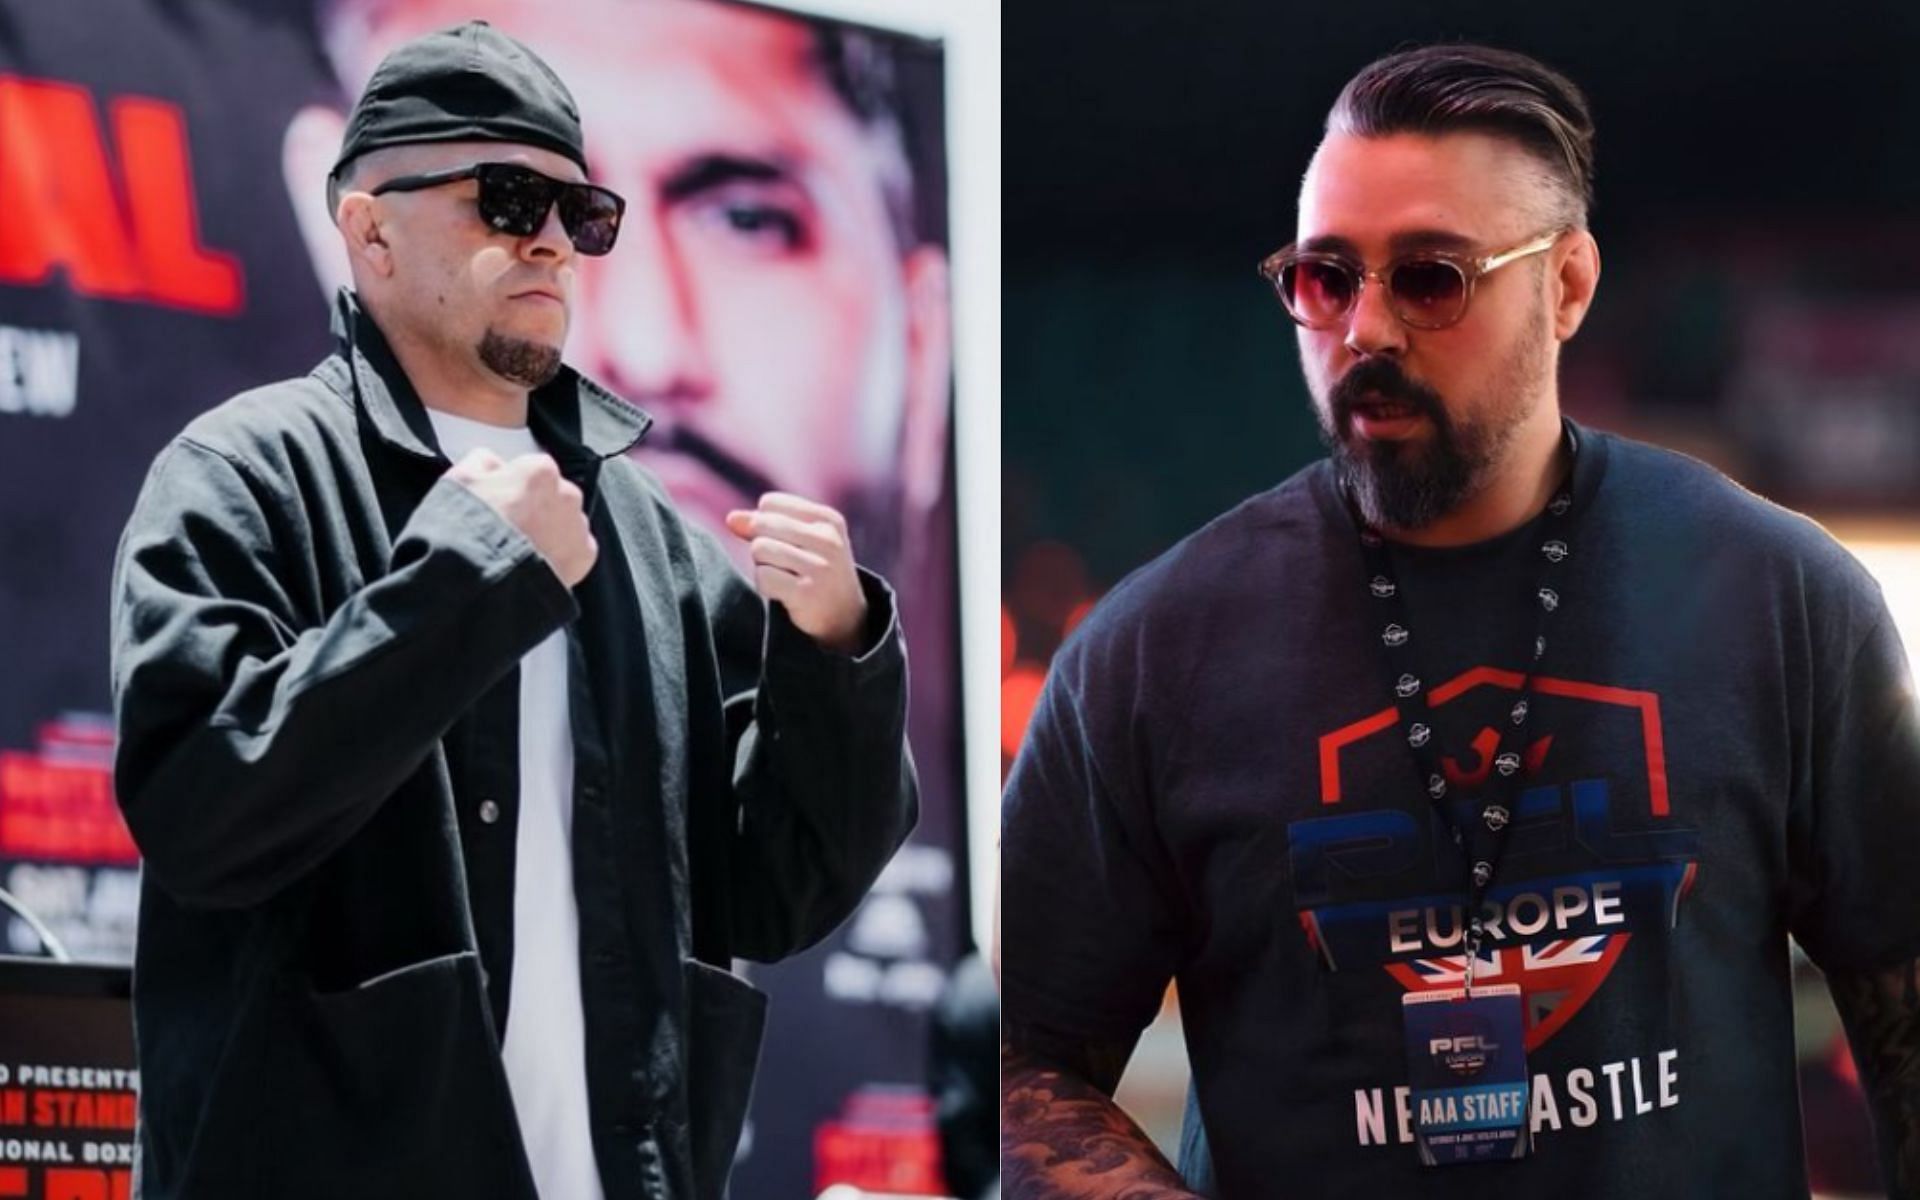 Dan Hardy (right) reacts to potential Nate Diaz (left) fight against Jake Paul in MMA [Images courtesy: @danhardymma and @natediaz209 on Instagram]